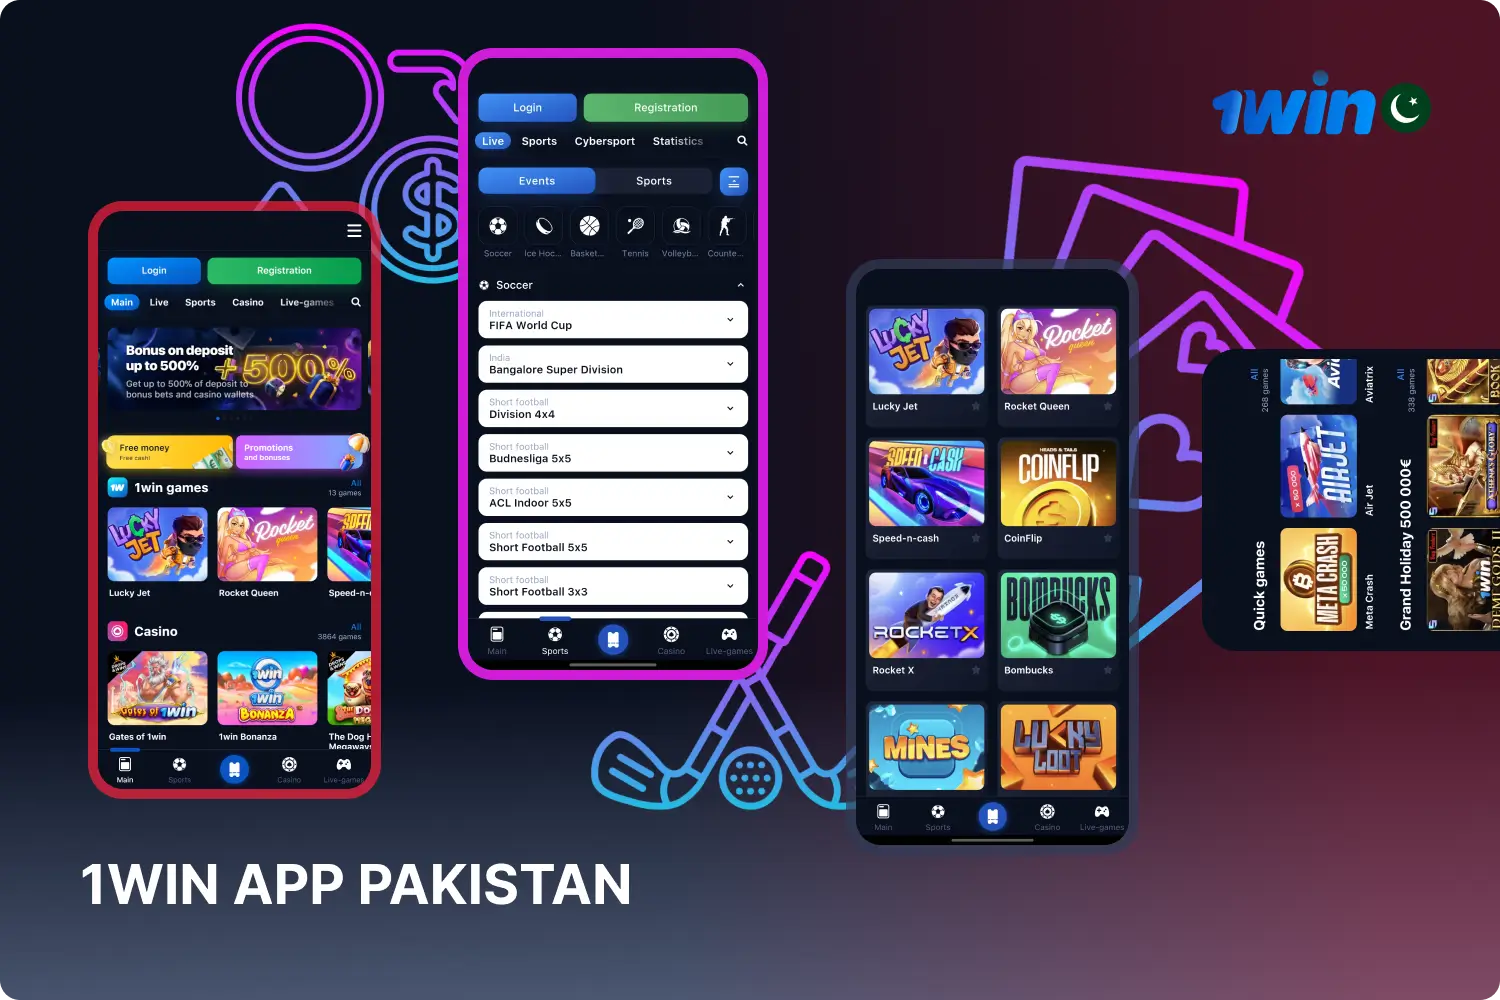 The 1win bet mobile app for Android and iOS allows users in Pakistan to bet on sports and play casino games with convenience